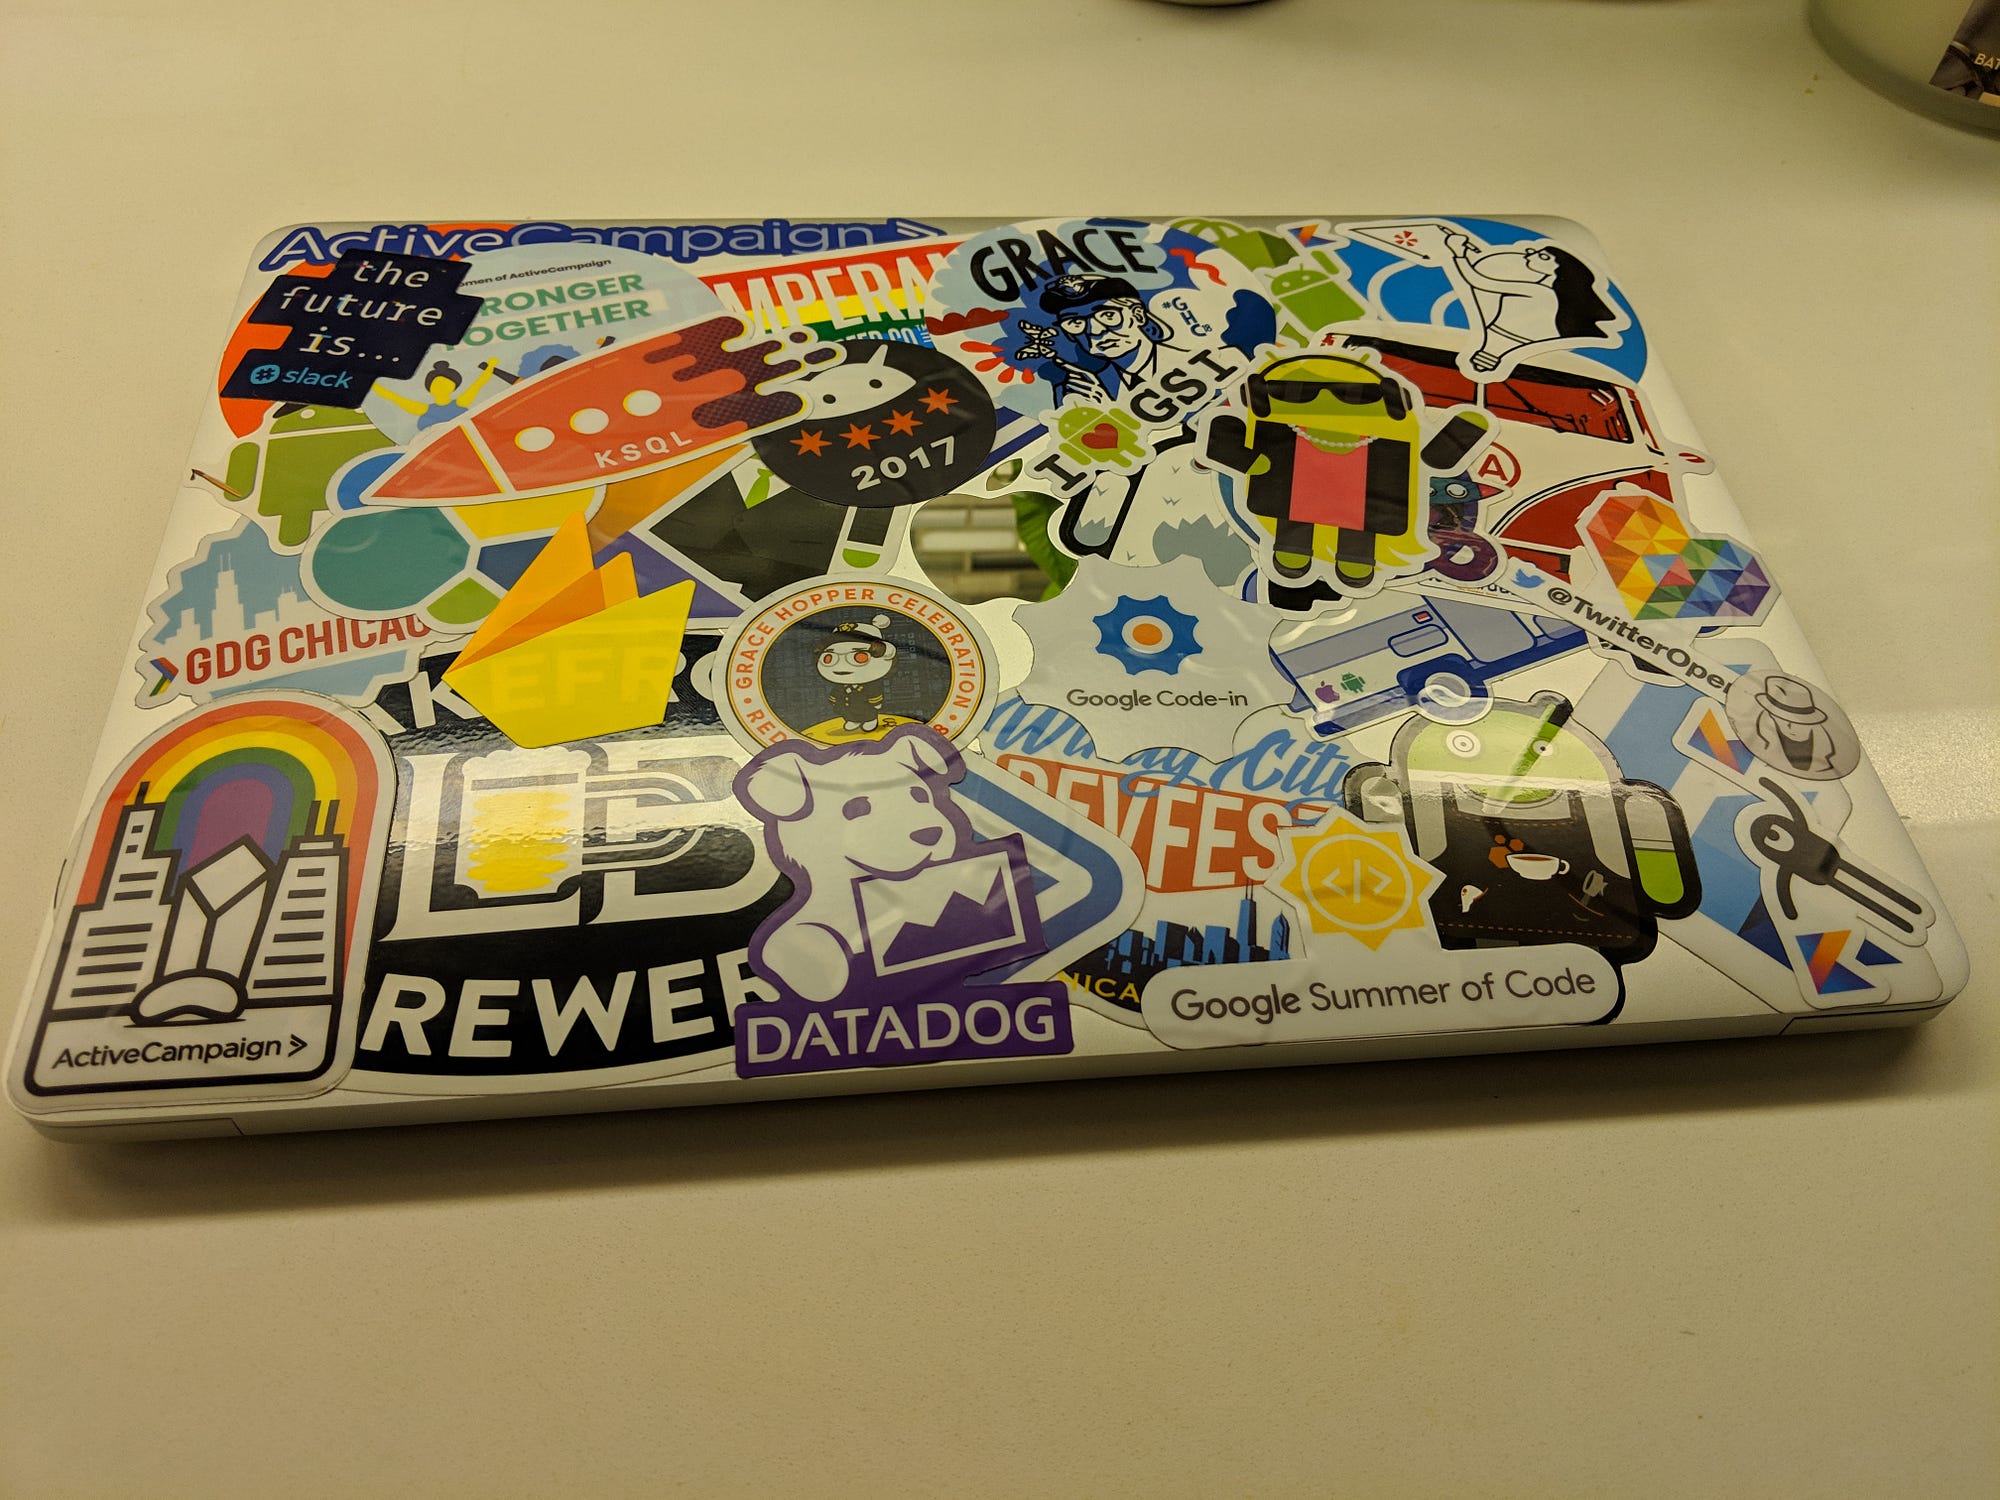 How To Remove Stickers From Your Work Laptop After Receiving a New Job., by Cody Engel